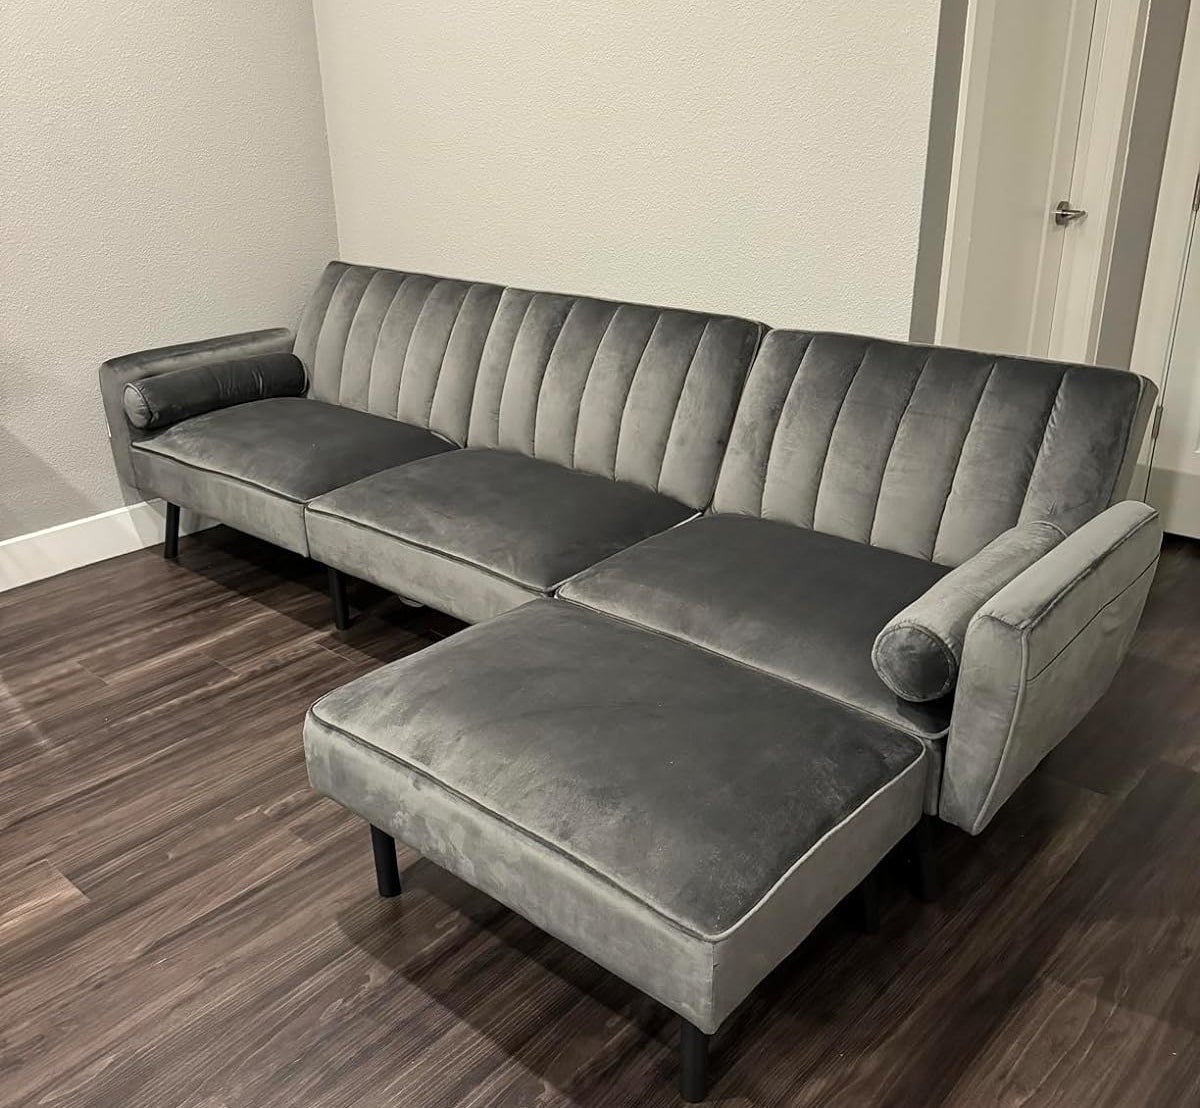 A silver-ish sofa sectional